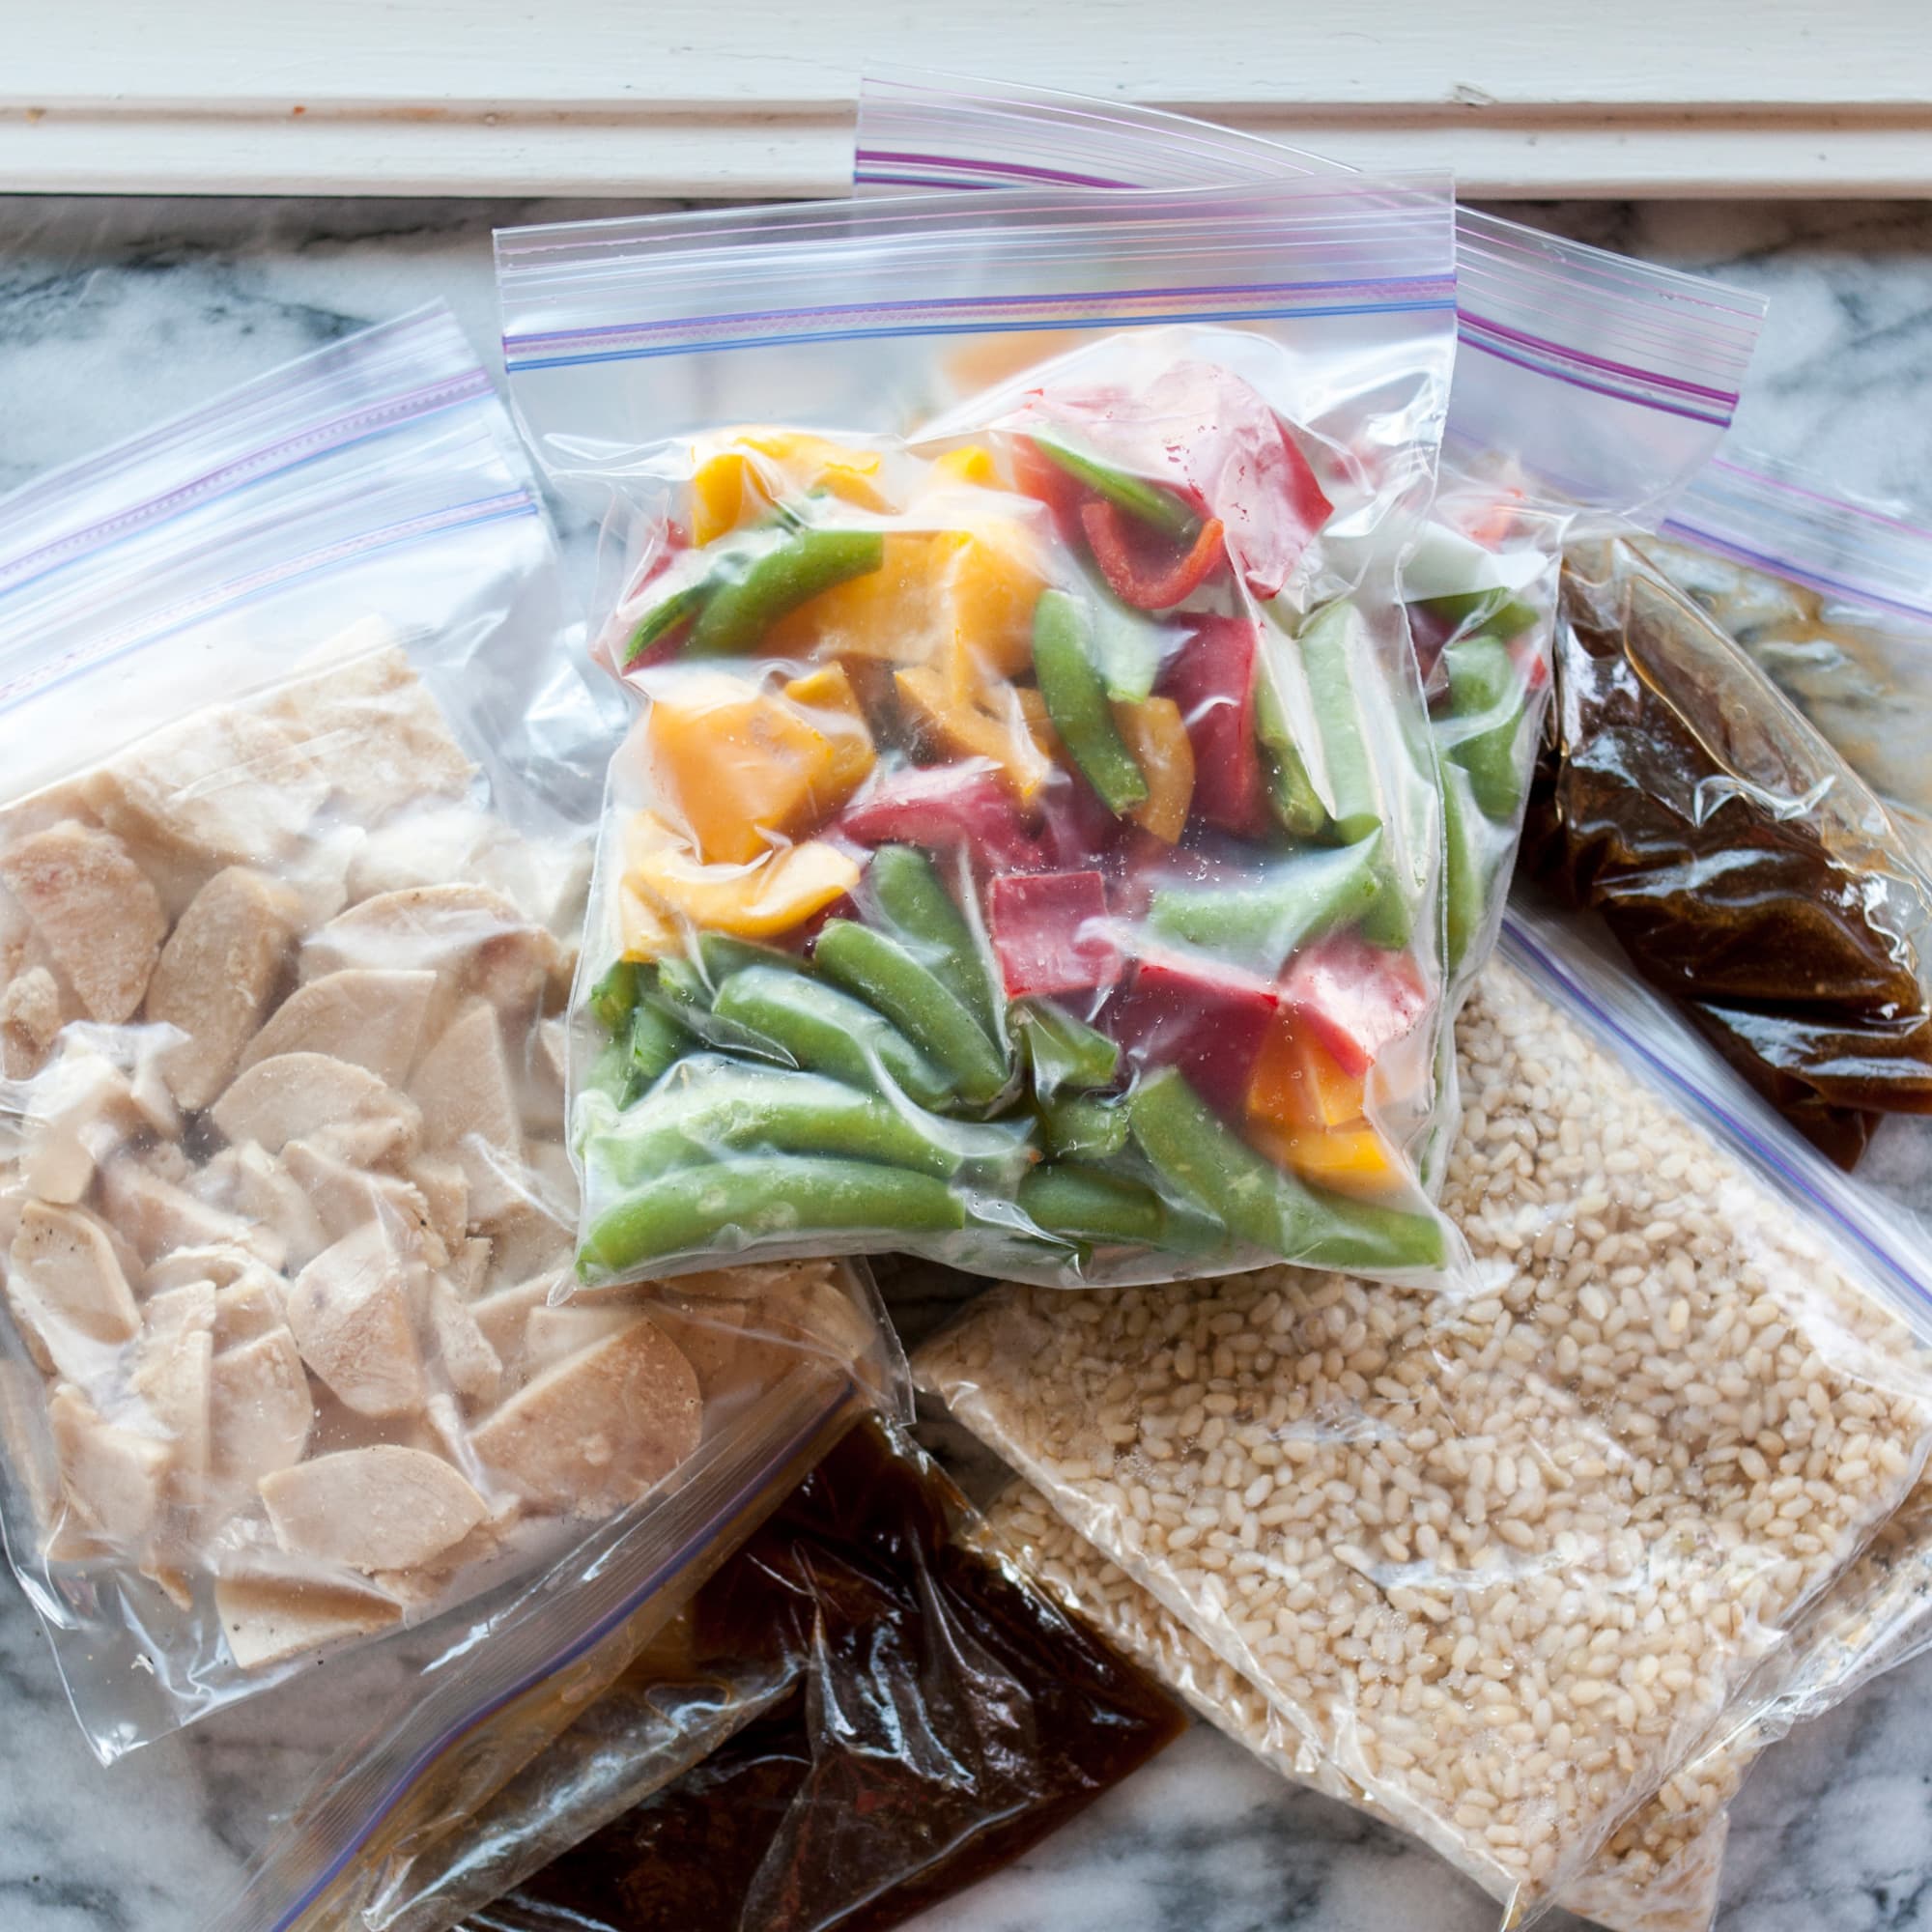 You Can Vacuum Seal Your Groceries Without Using a Sealer — Here's How